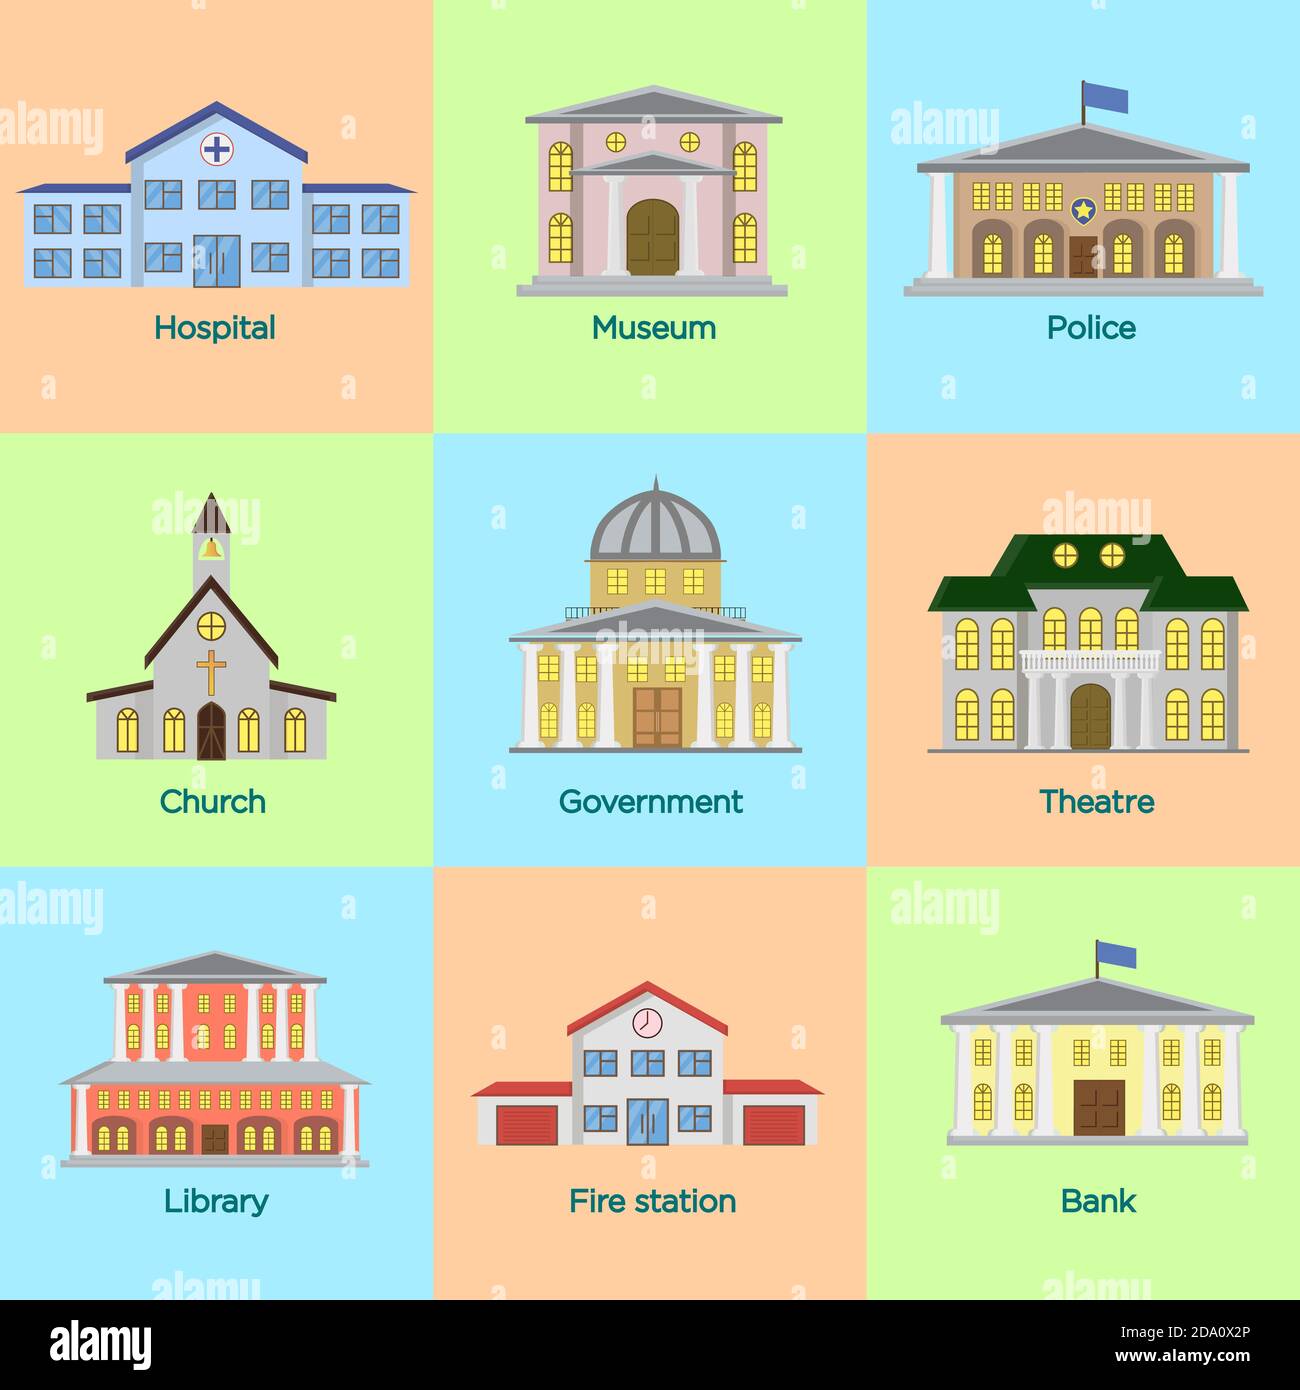 Vector illustration icons set of colorful public buildings in flat style. Stock Vector